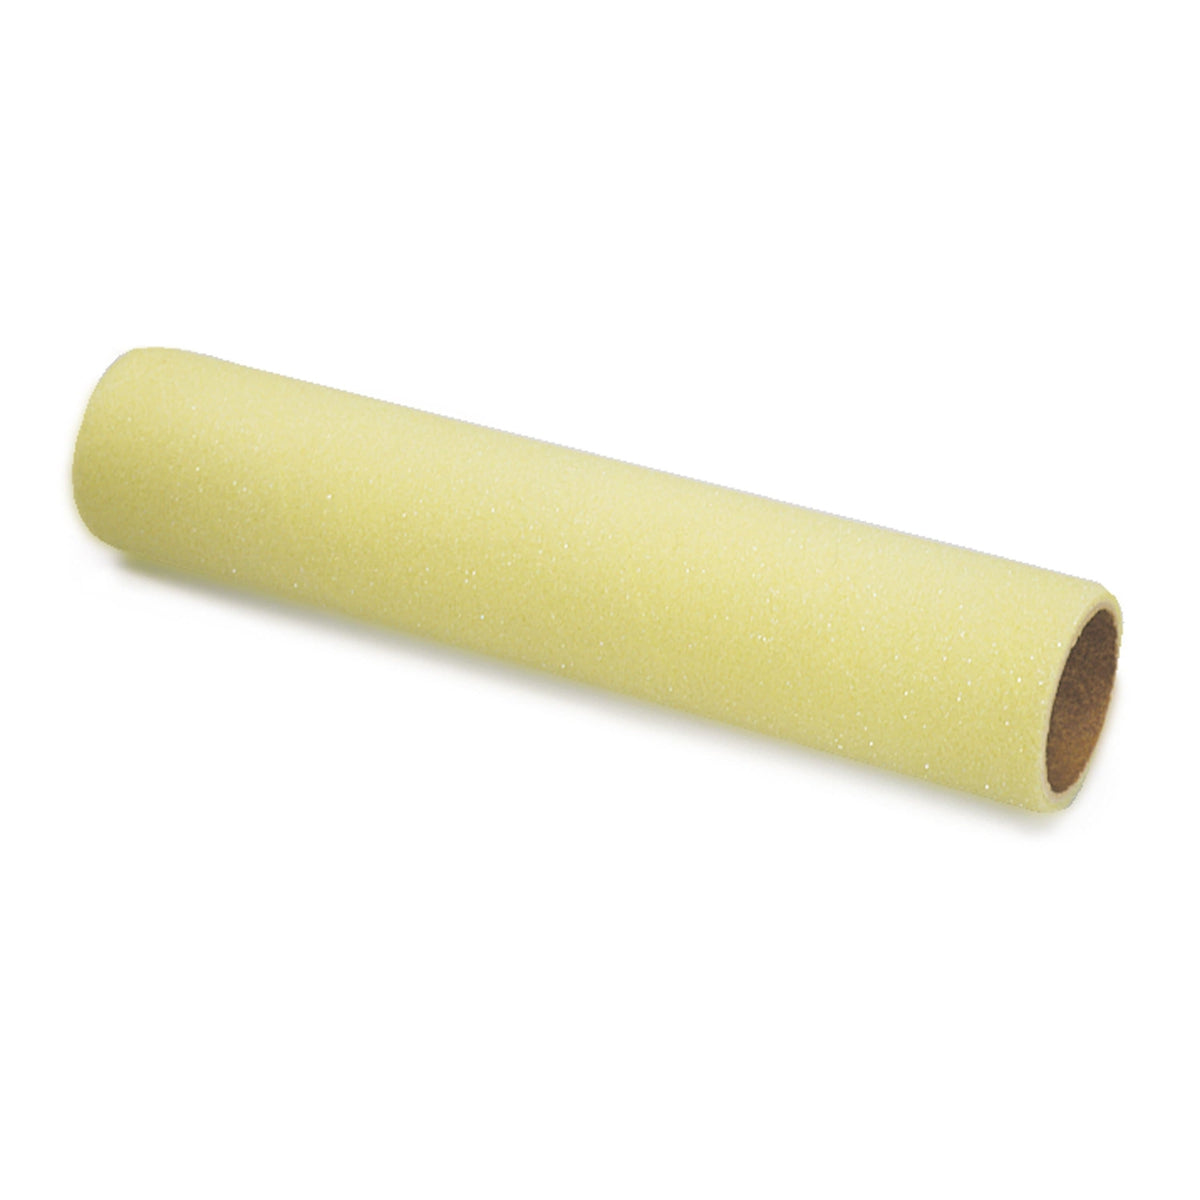 Redtree Foam Paint Roller Cover 4" #24302